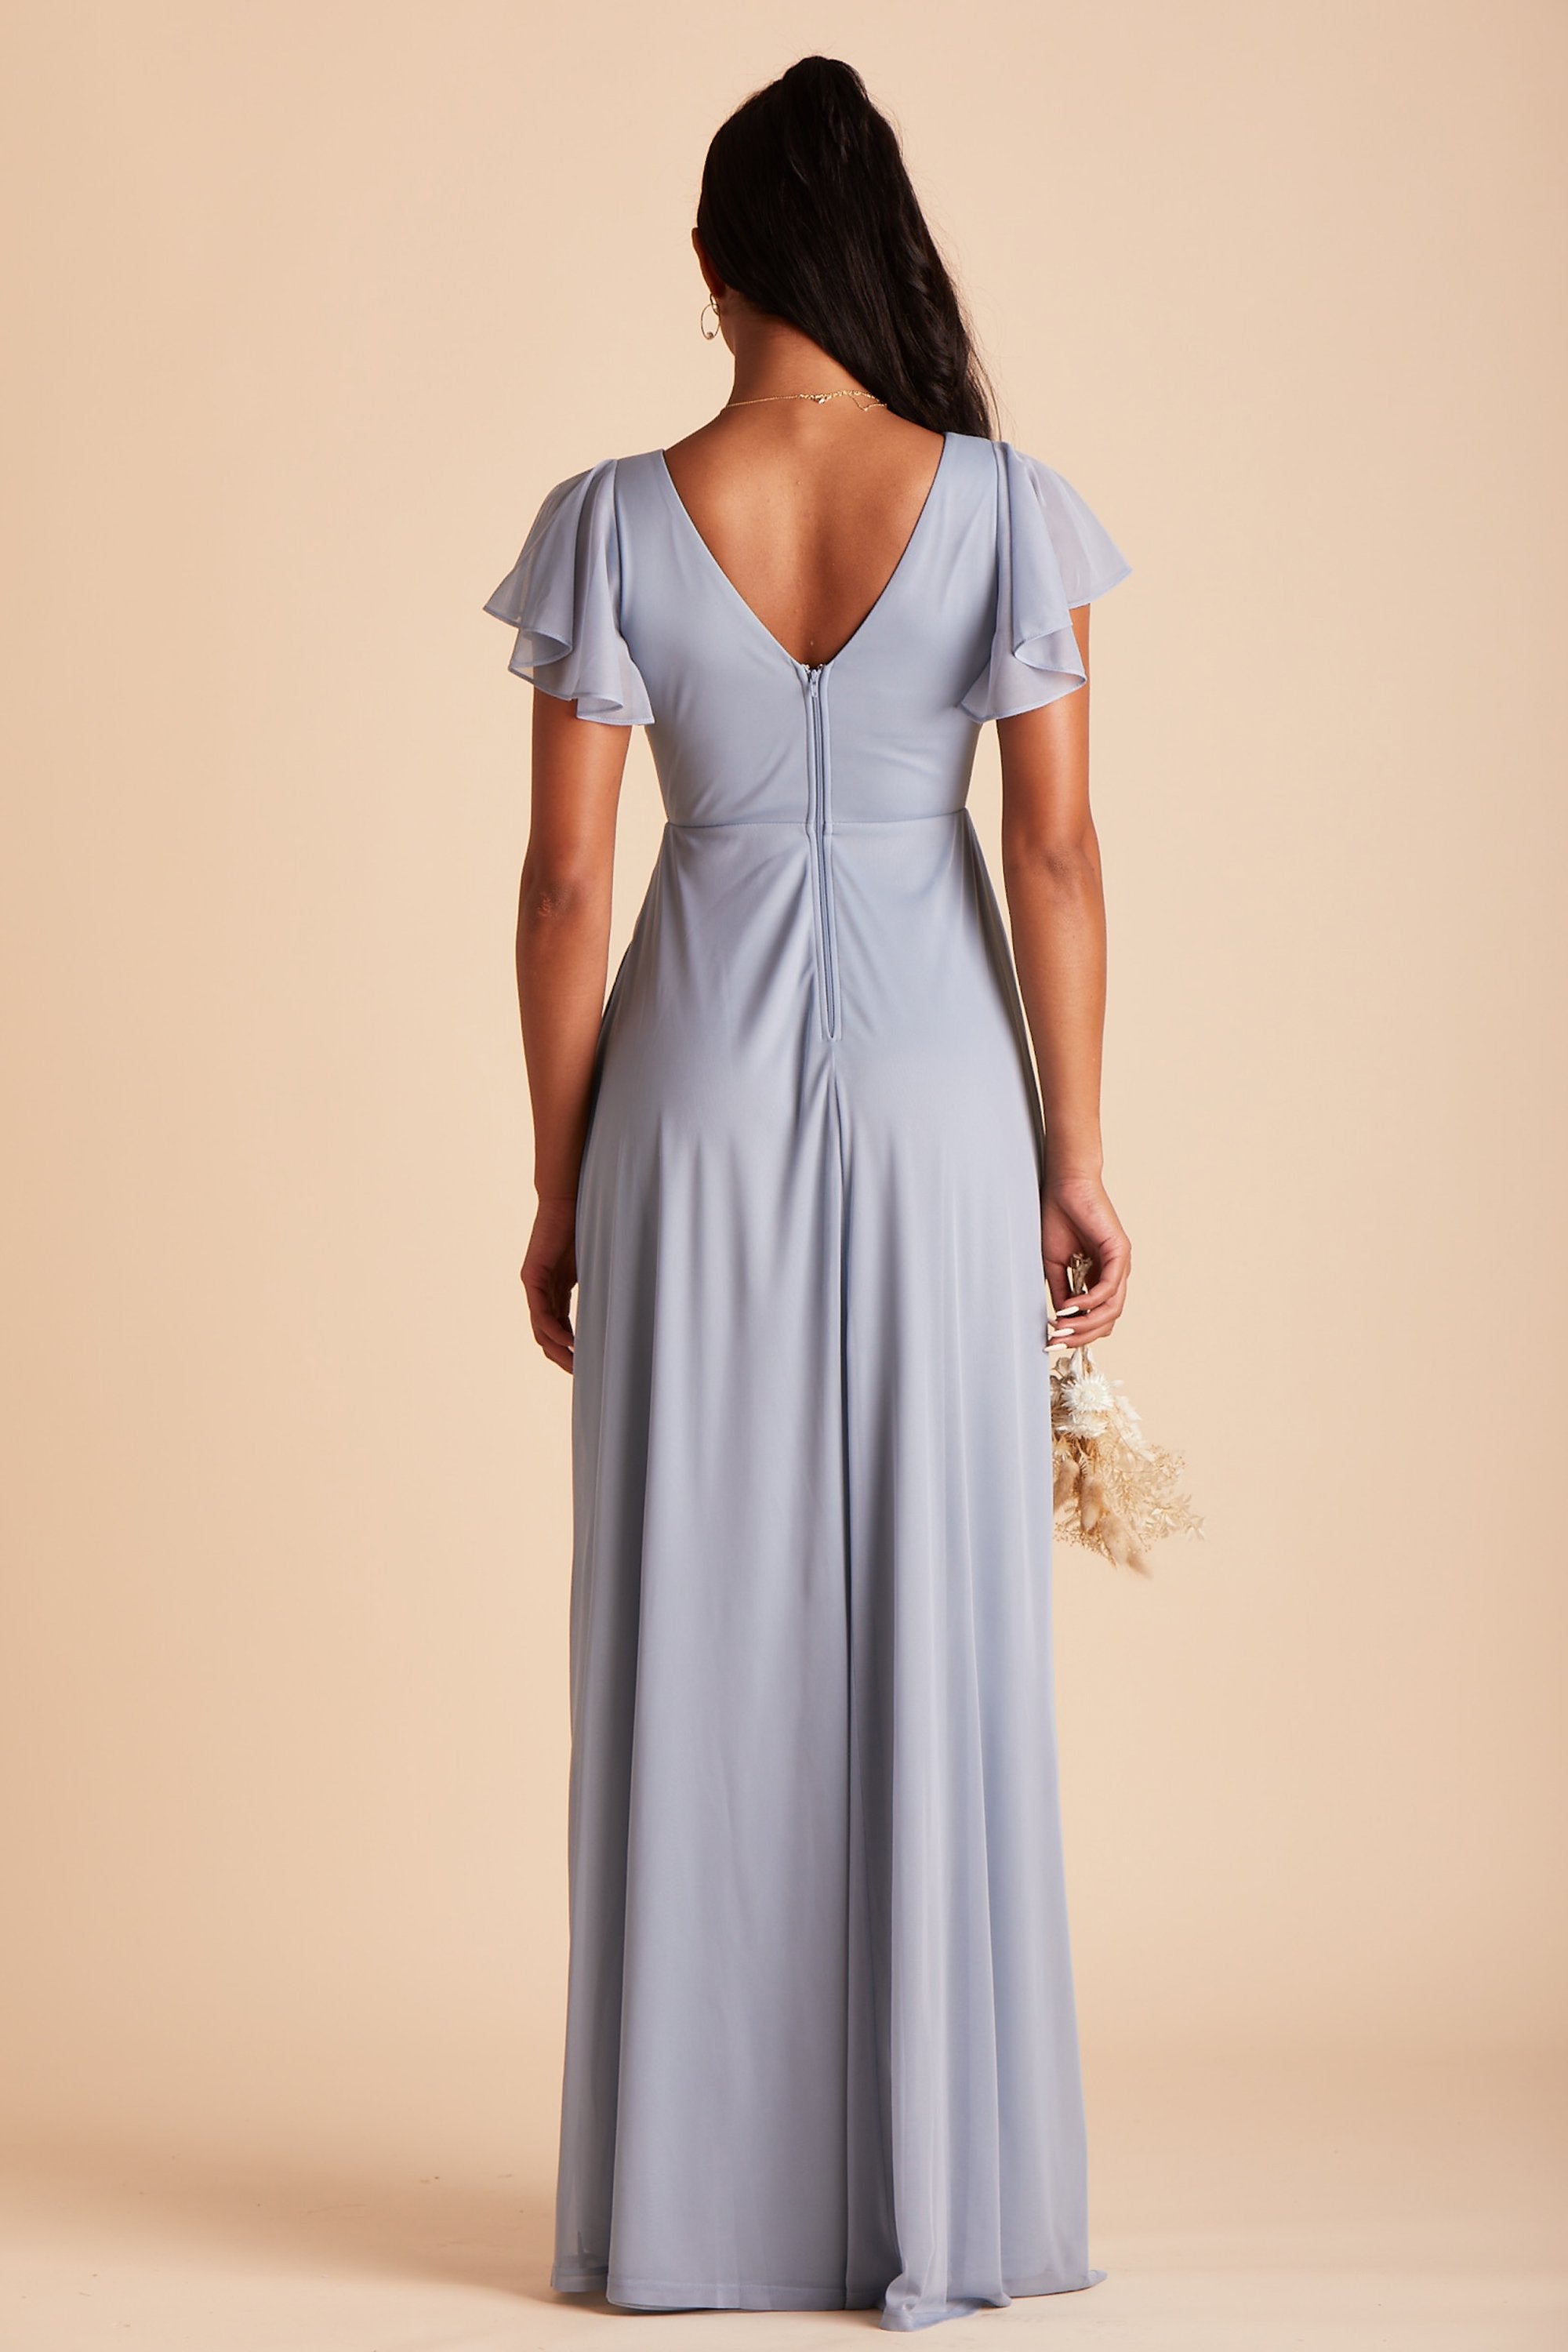 Hannah bridesmaids dress in dusty blue mesh by Birdy Grey, back view